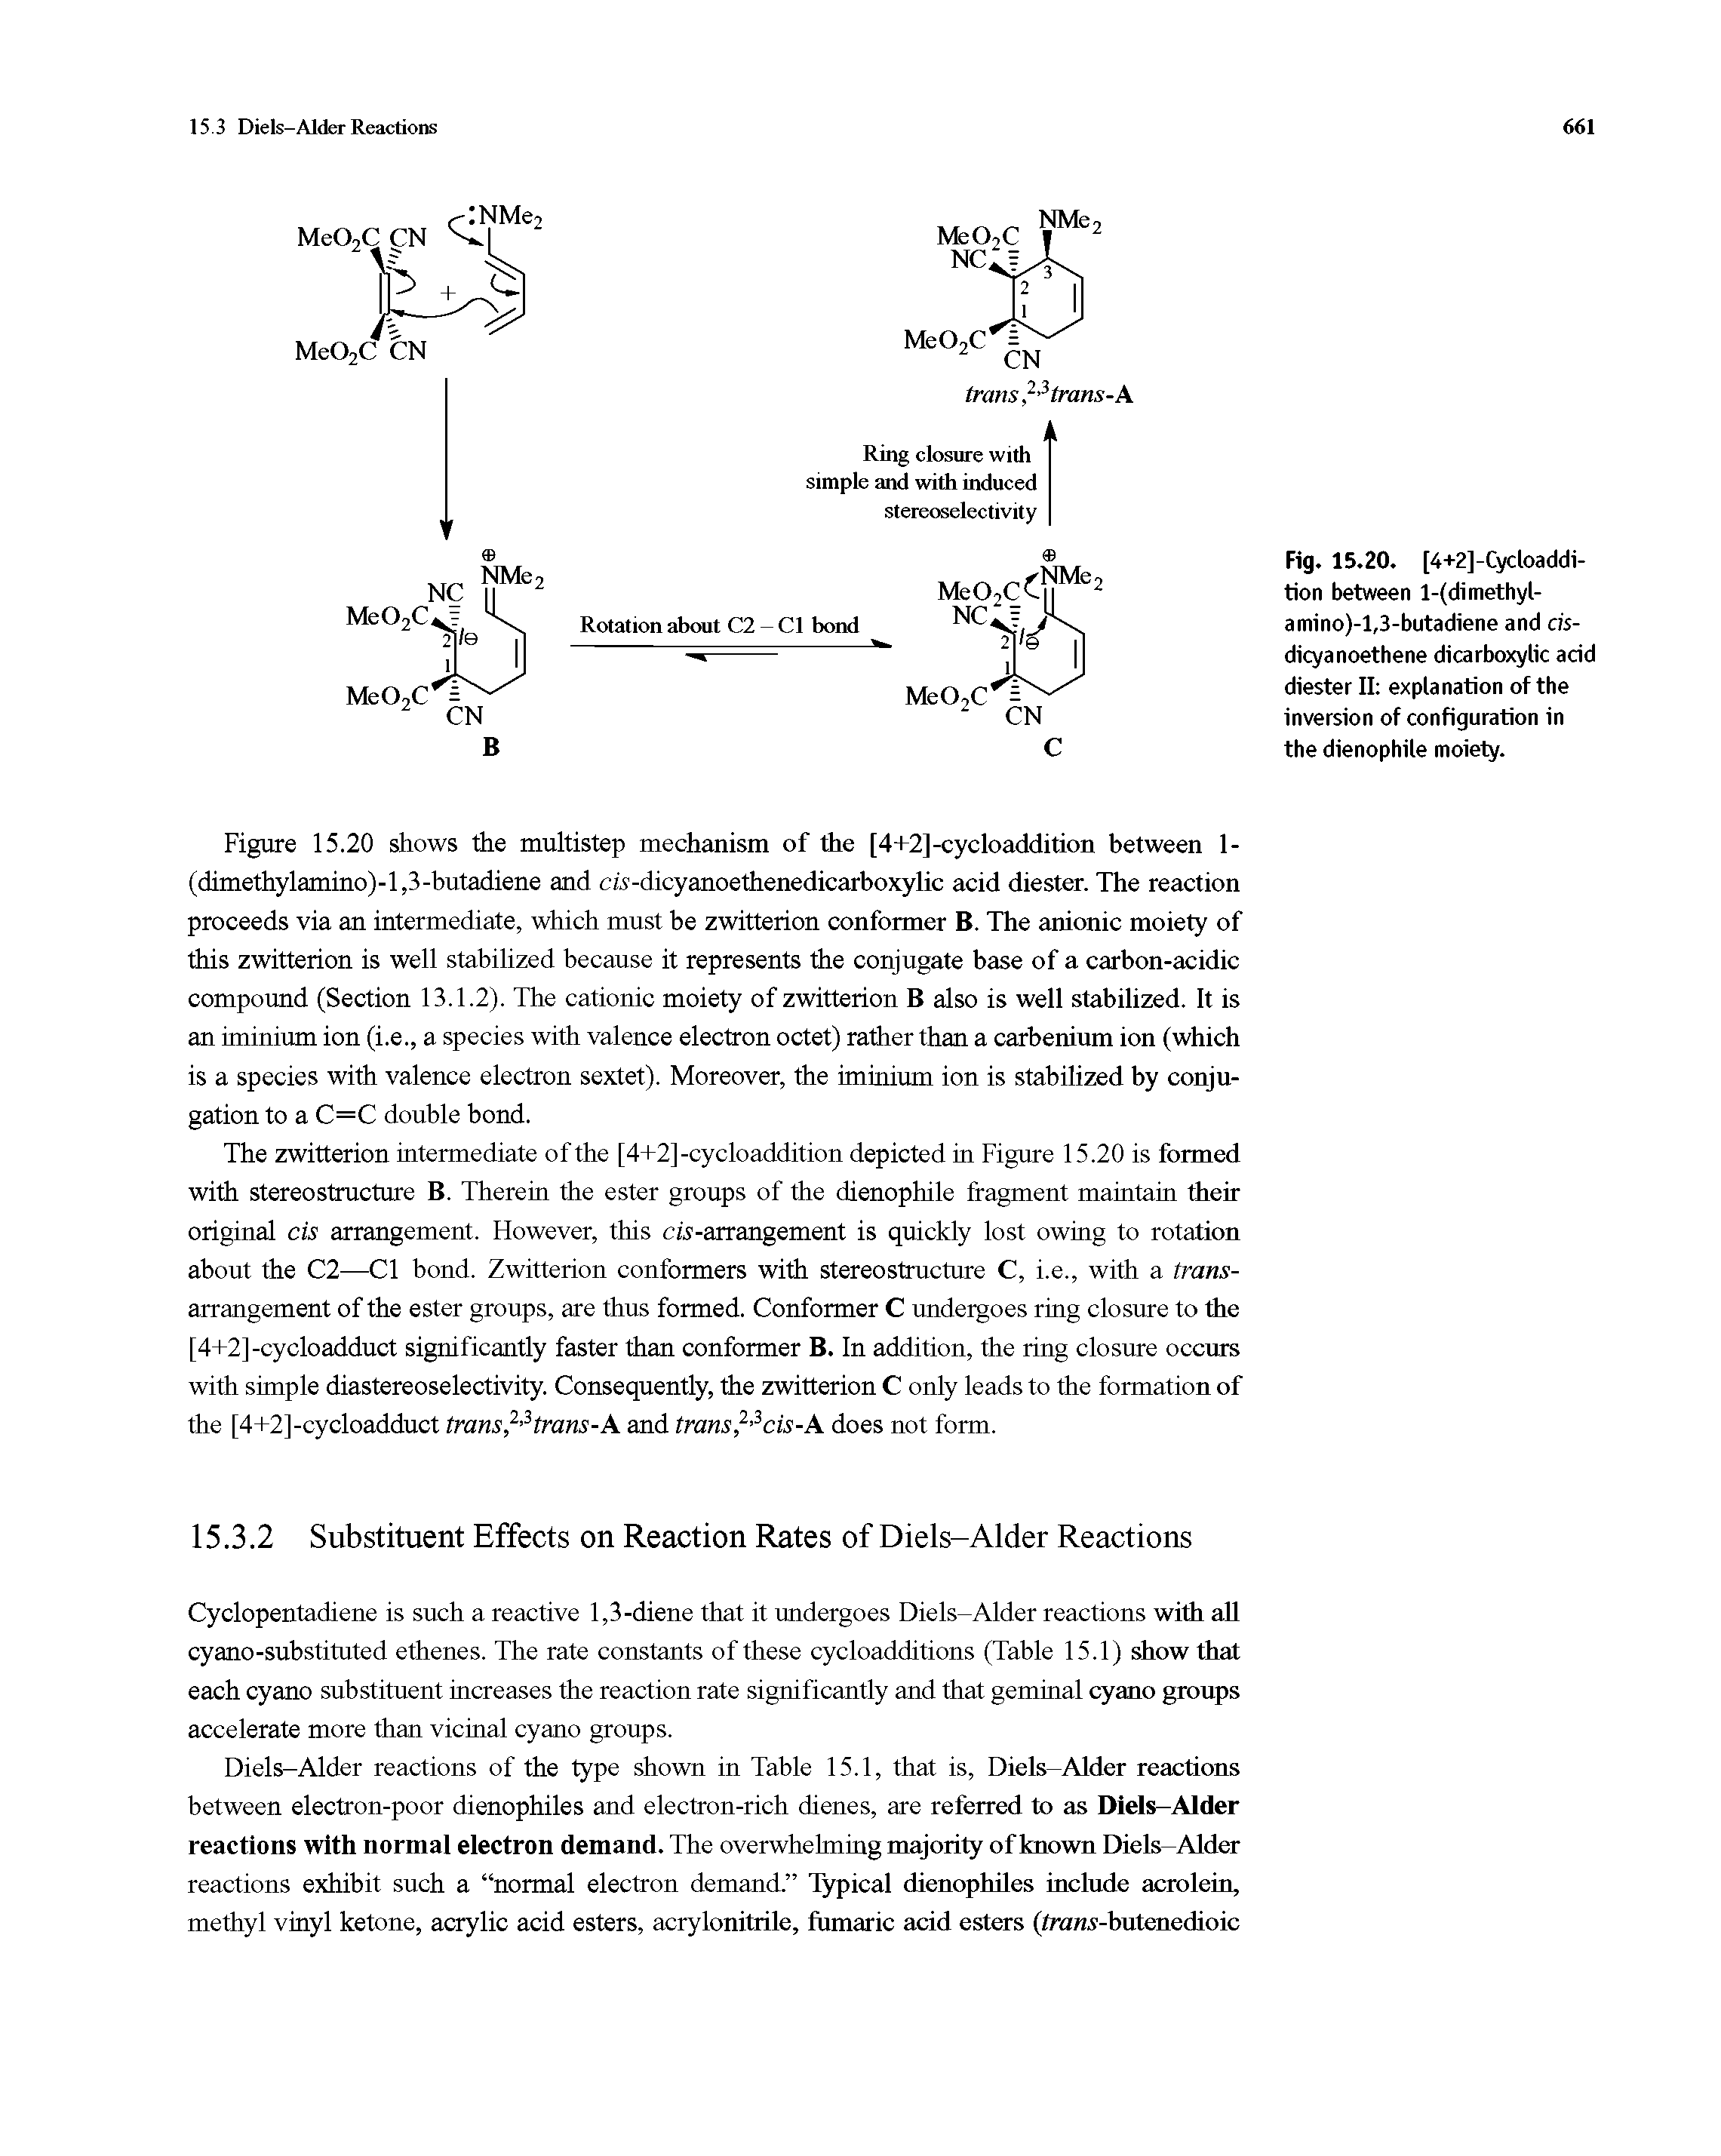 Fig. 15.20. [4+2]-Cycloaddi-tion between l-(di methyl-amino)- , 3-butadiene and cis-dicyanoethene dicarboxylic acid diester II explanation of the inversion of configuration in the dienophile moiety.